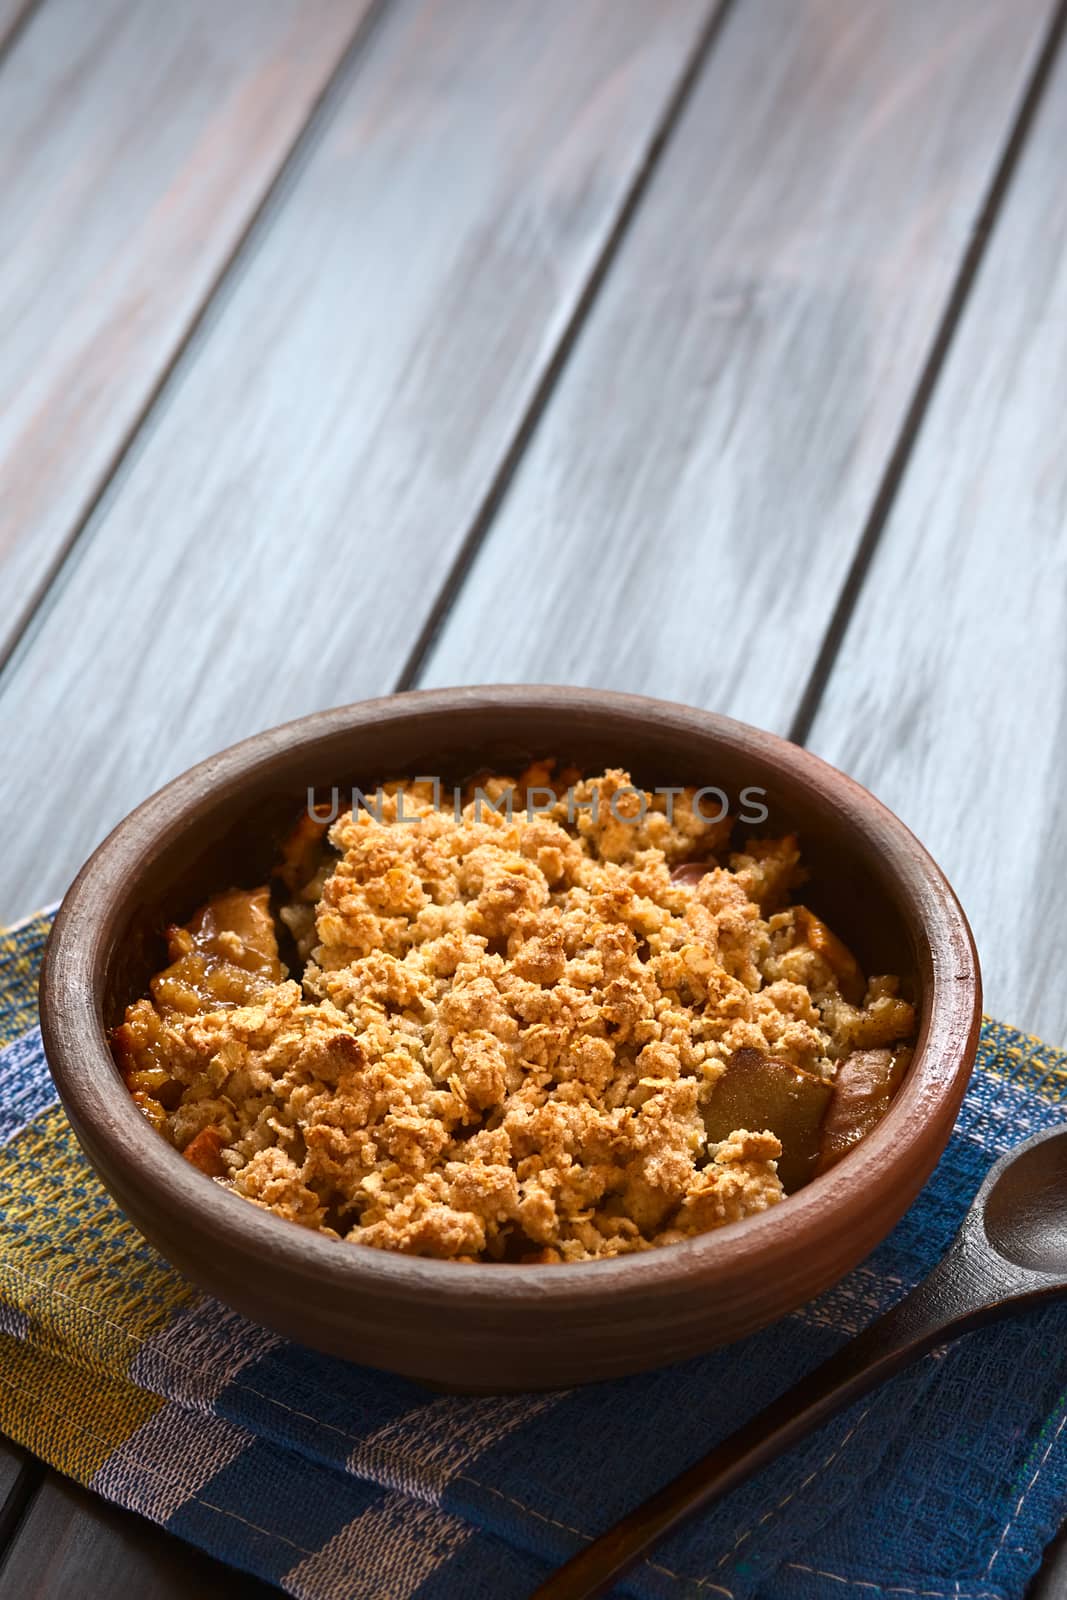 Baked Apple Crumble by ildi